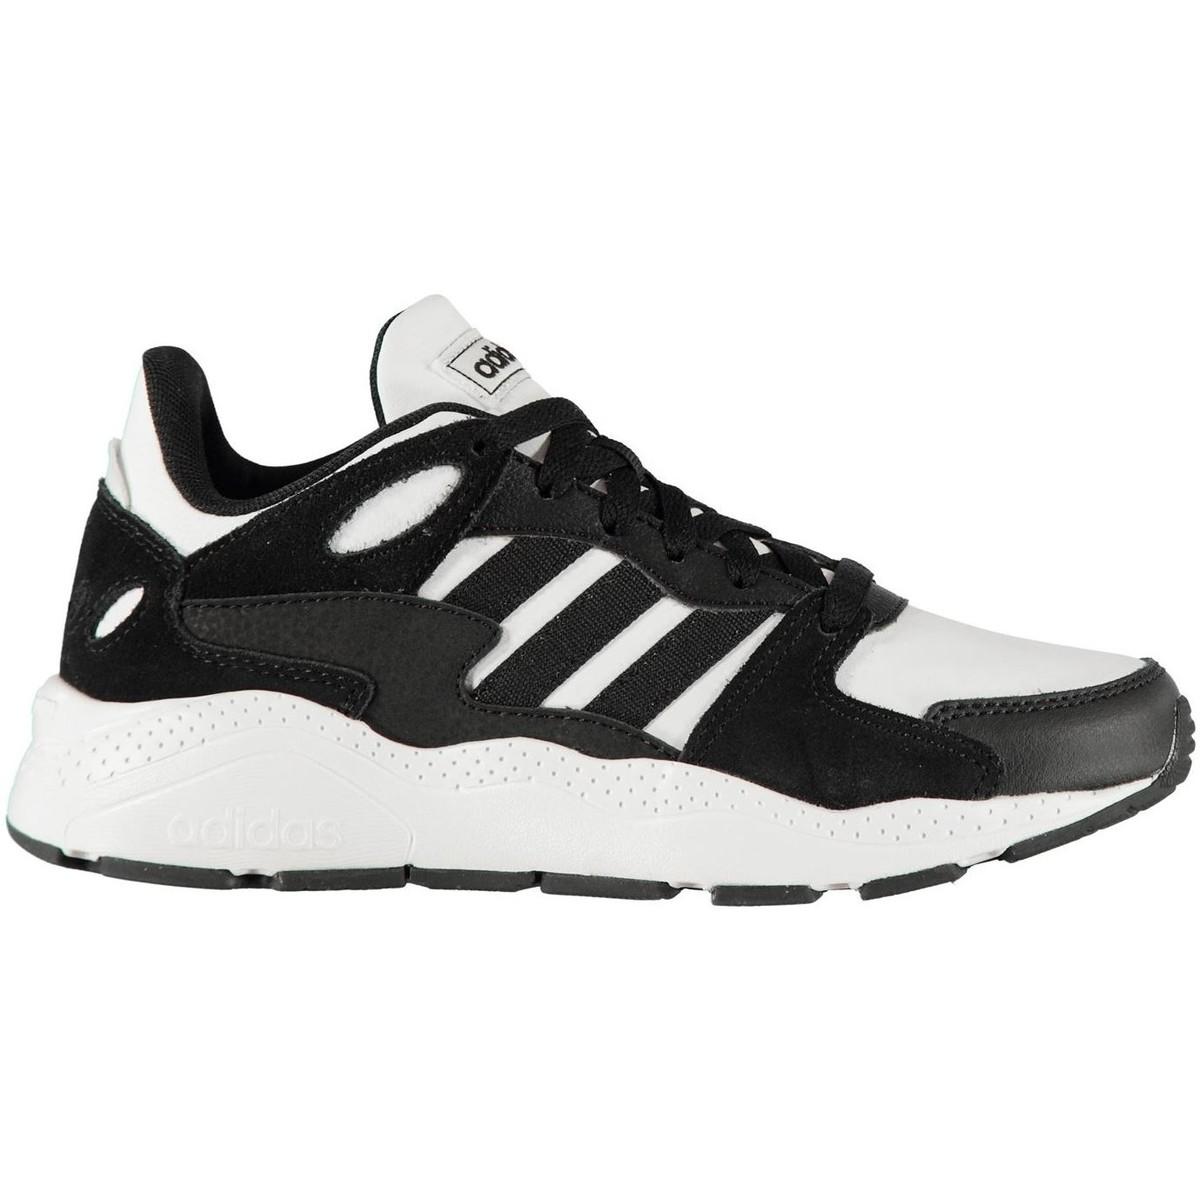 adidas crazy chaos trainers